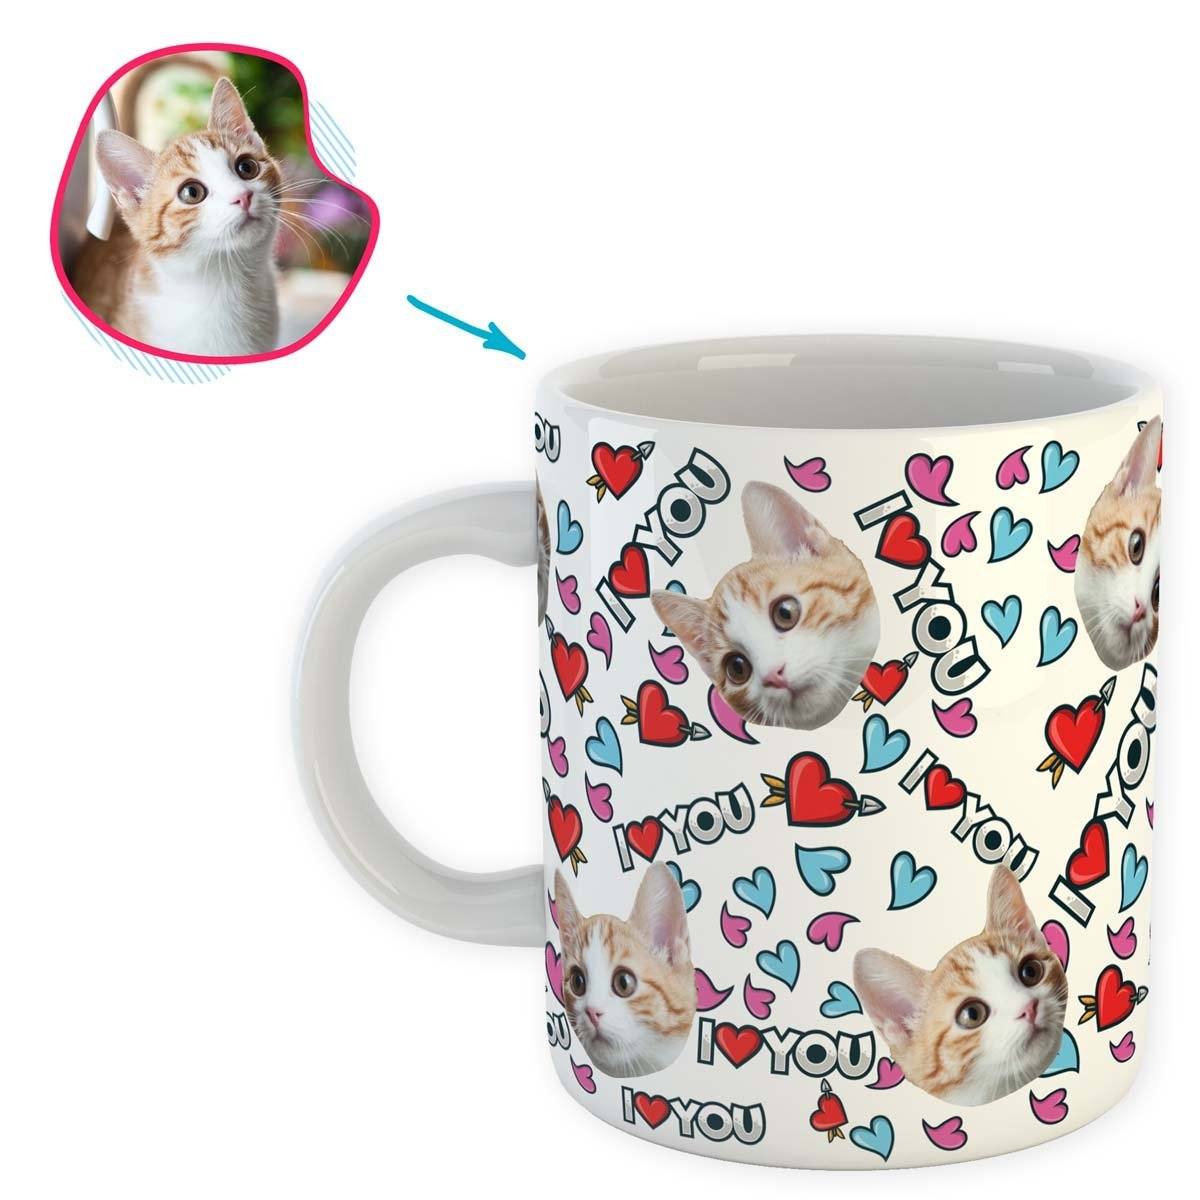 white Love You mug personalized with photo of face printed on it